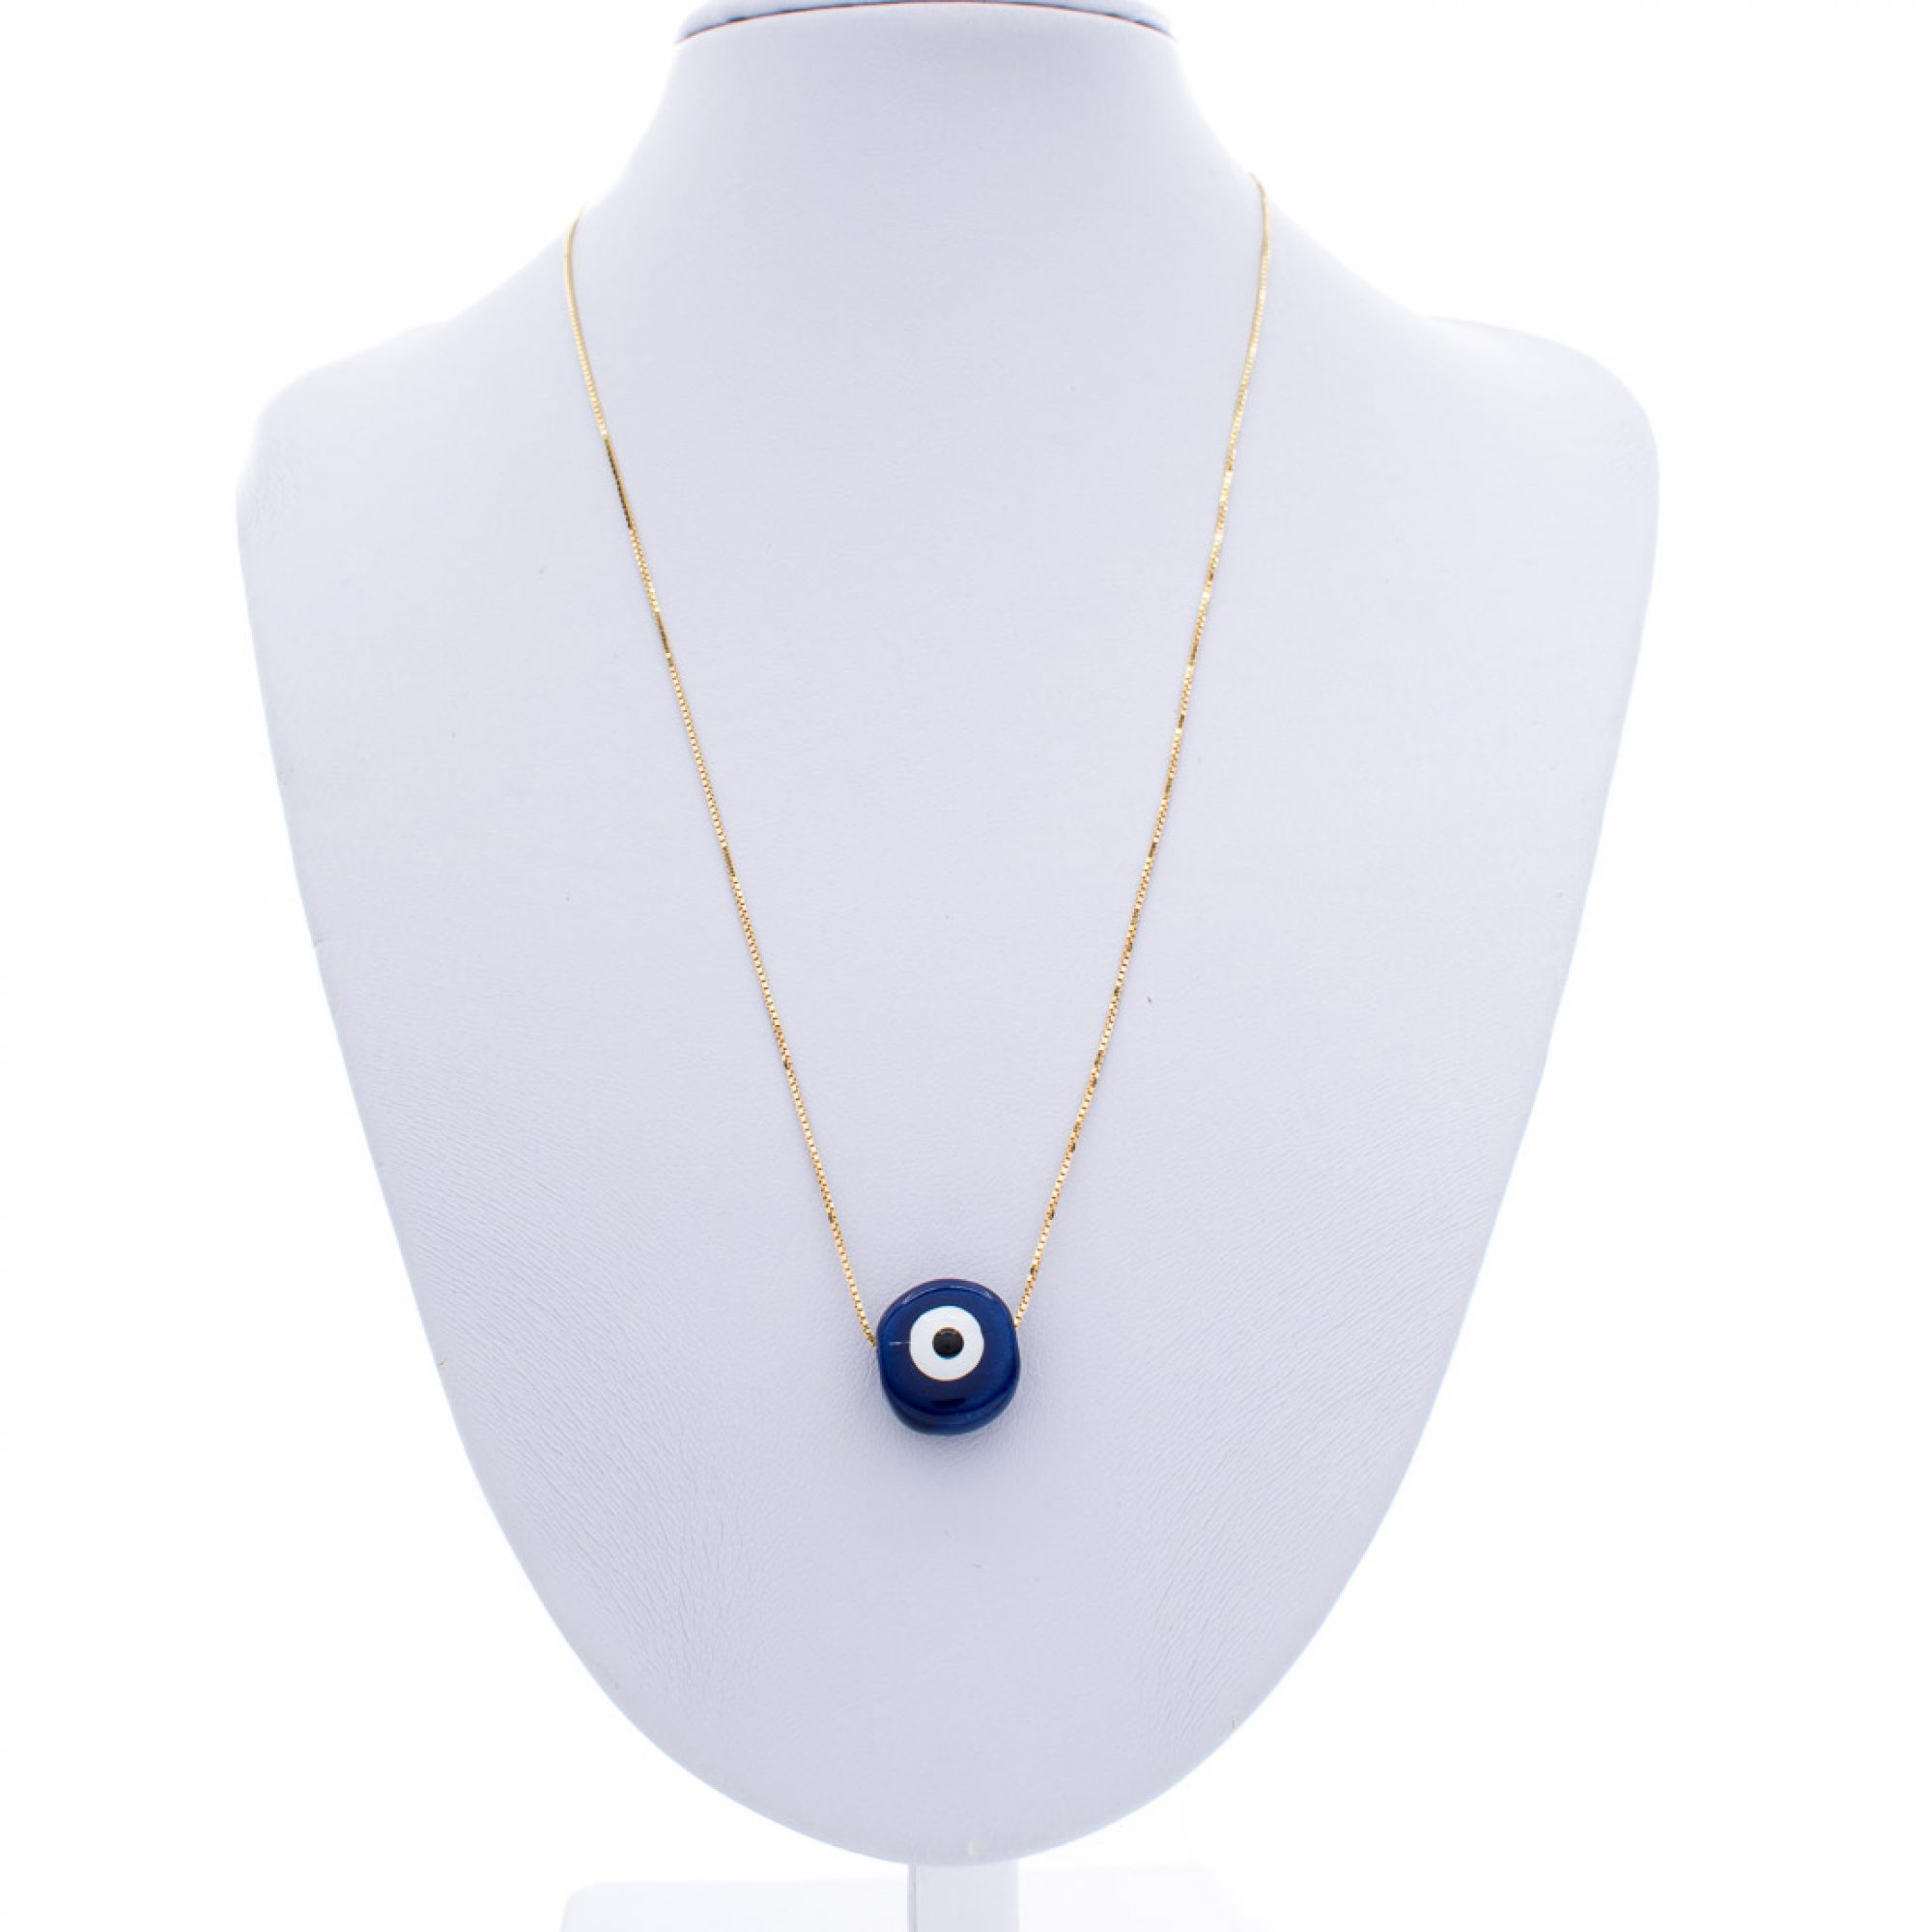 Gold plated eye bead necklace